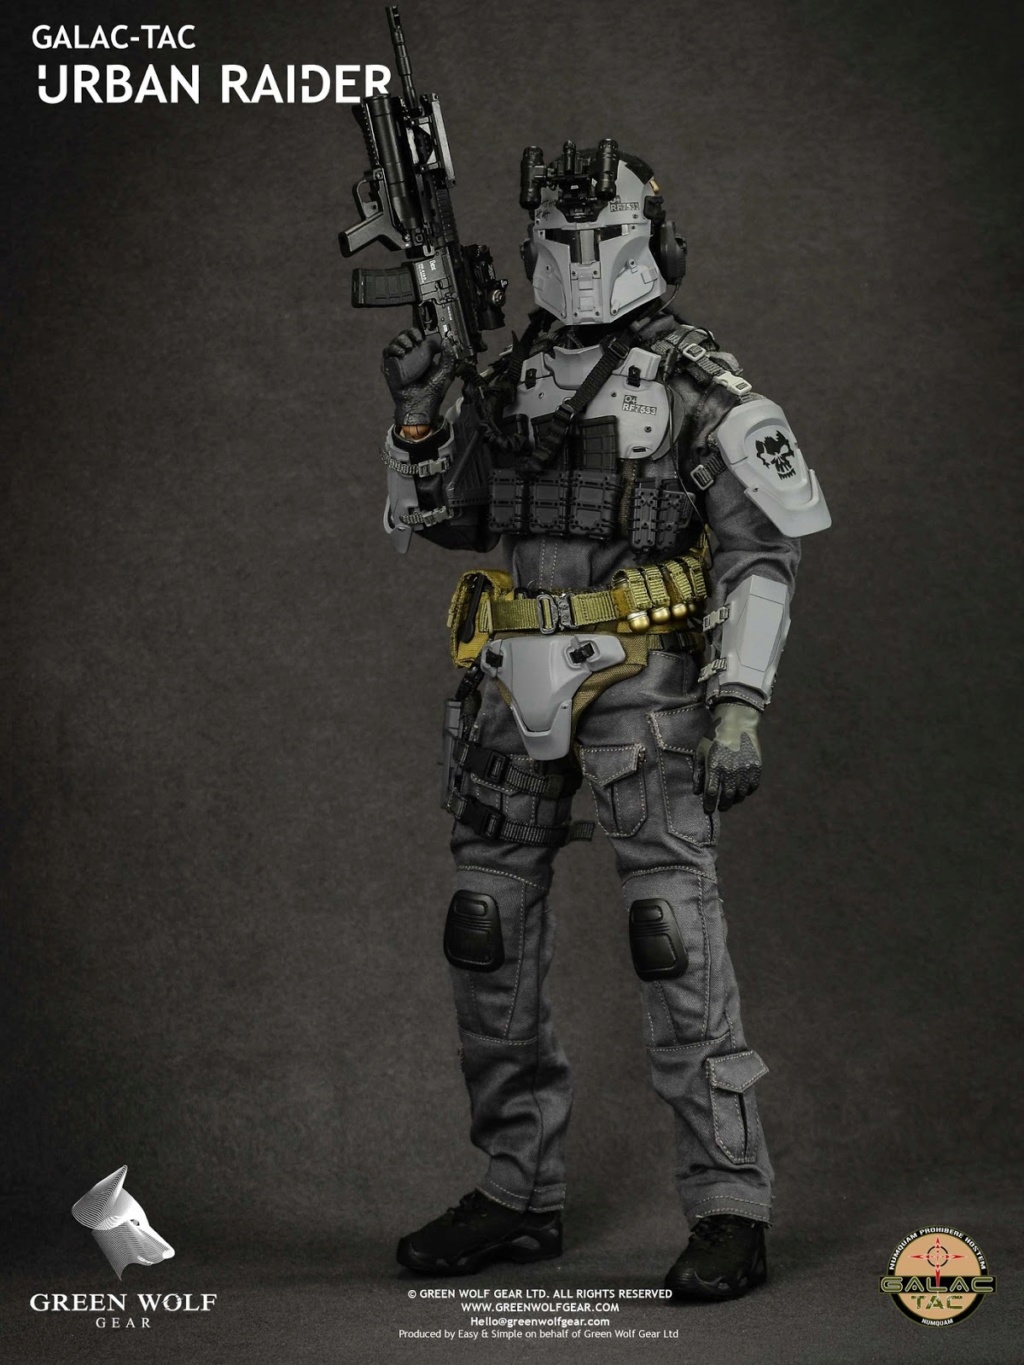 NEW PRODUCT: Green Wolf Gear 1/6th scale GALAC-TAC Urban Raider 12-inch action figure 294